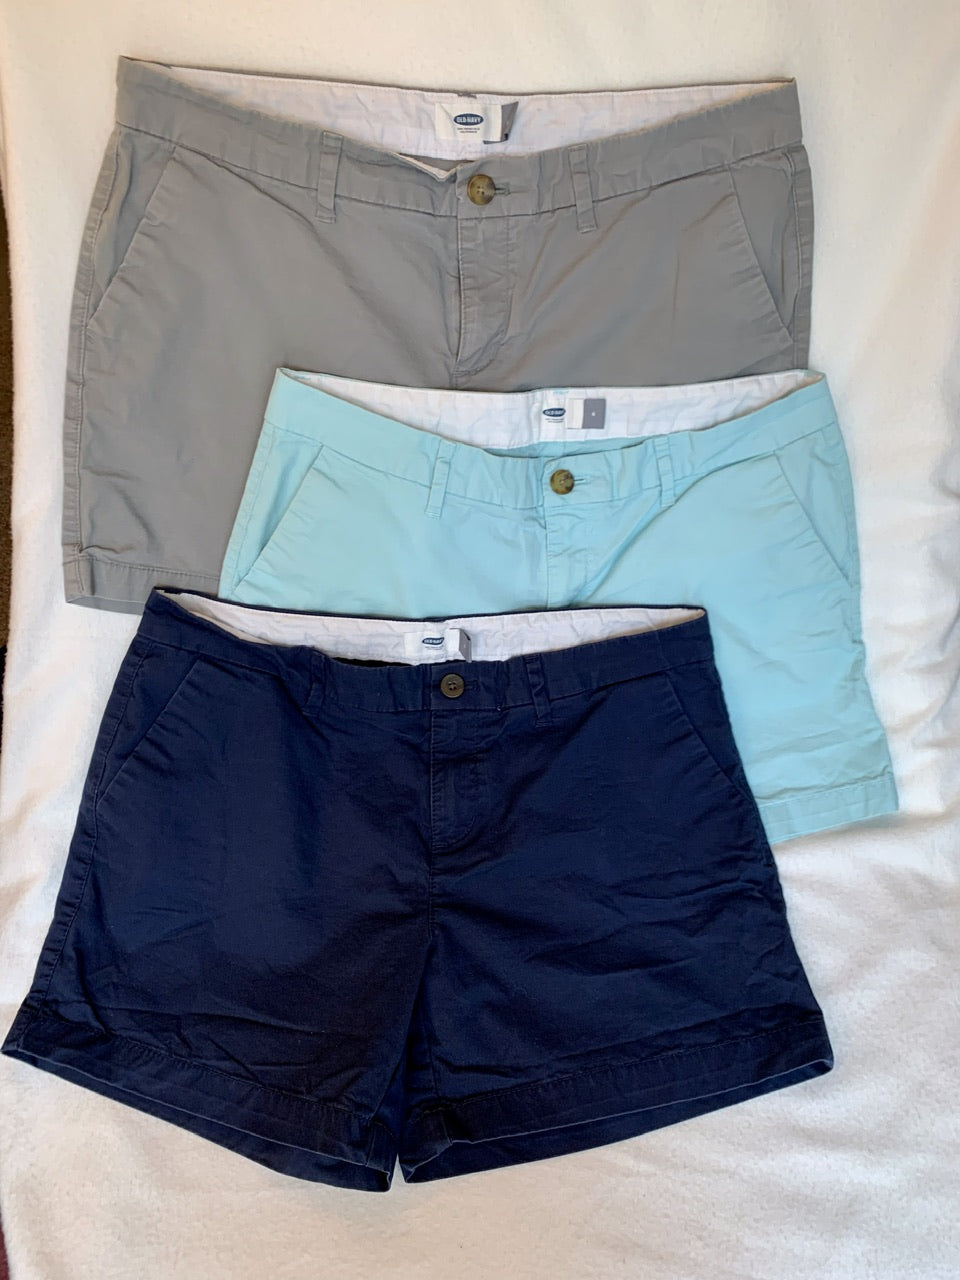 Size 6 Women’s Old Navy casual shorts - bundle of 3 - blues